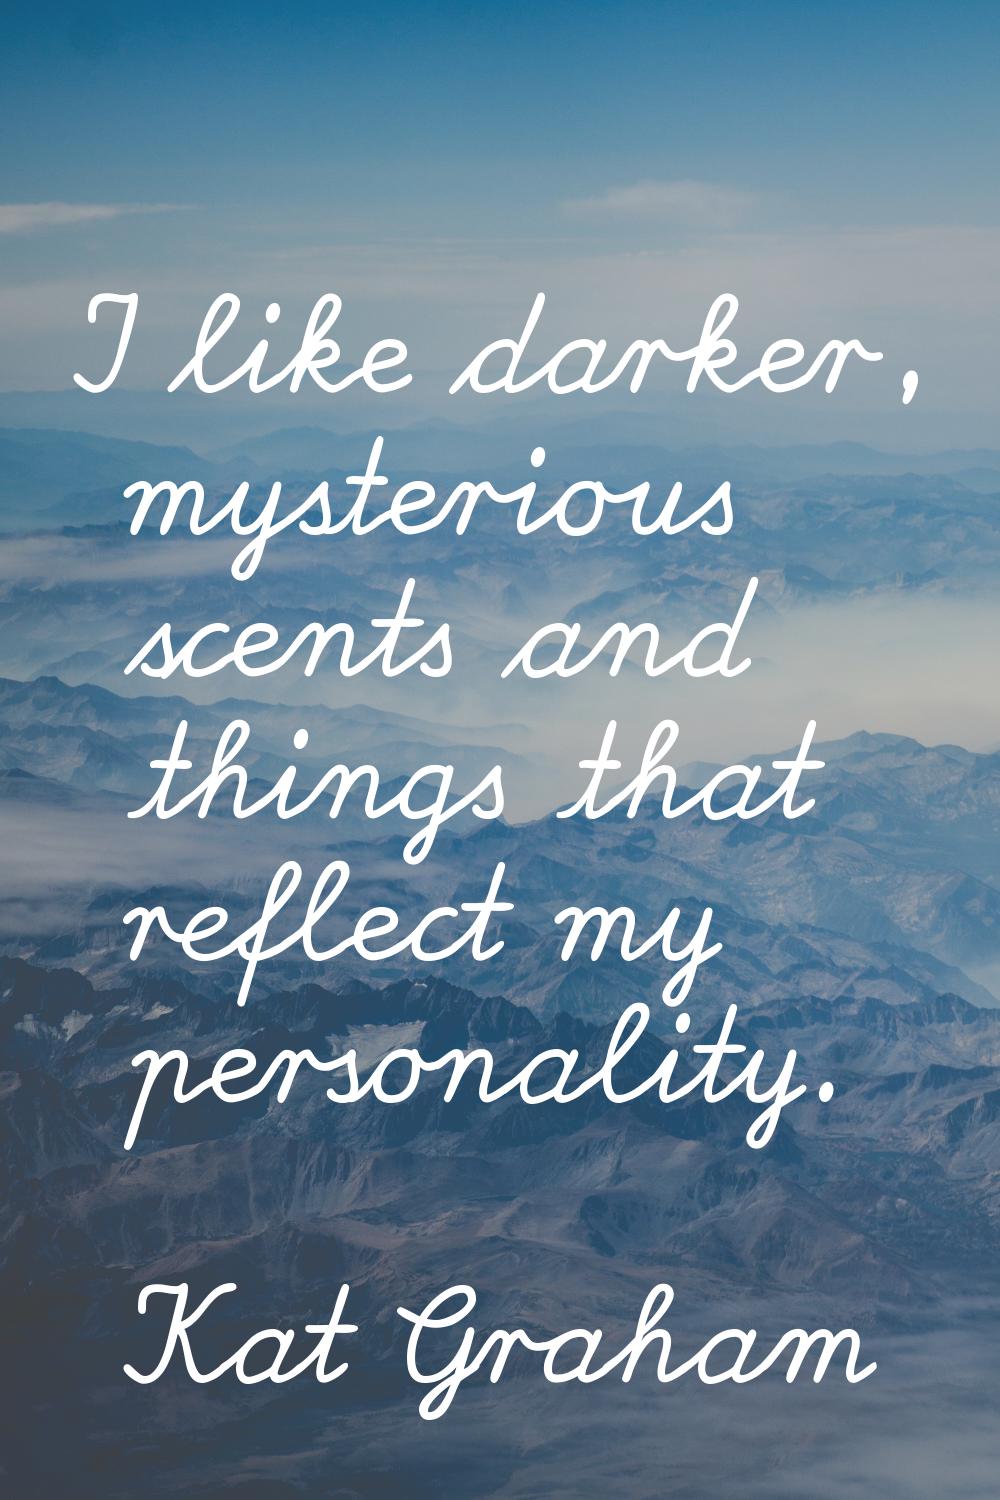 I like darker, mysterious scents and things that reflect my personality.